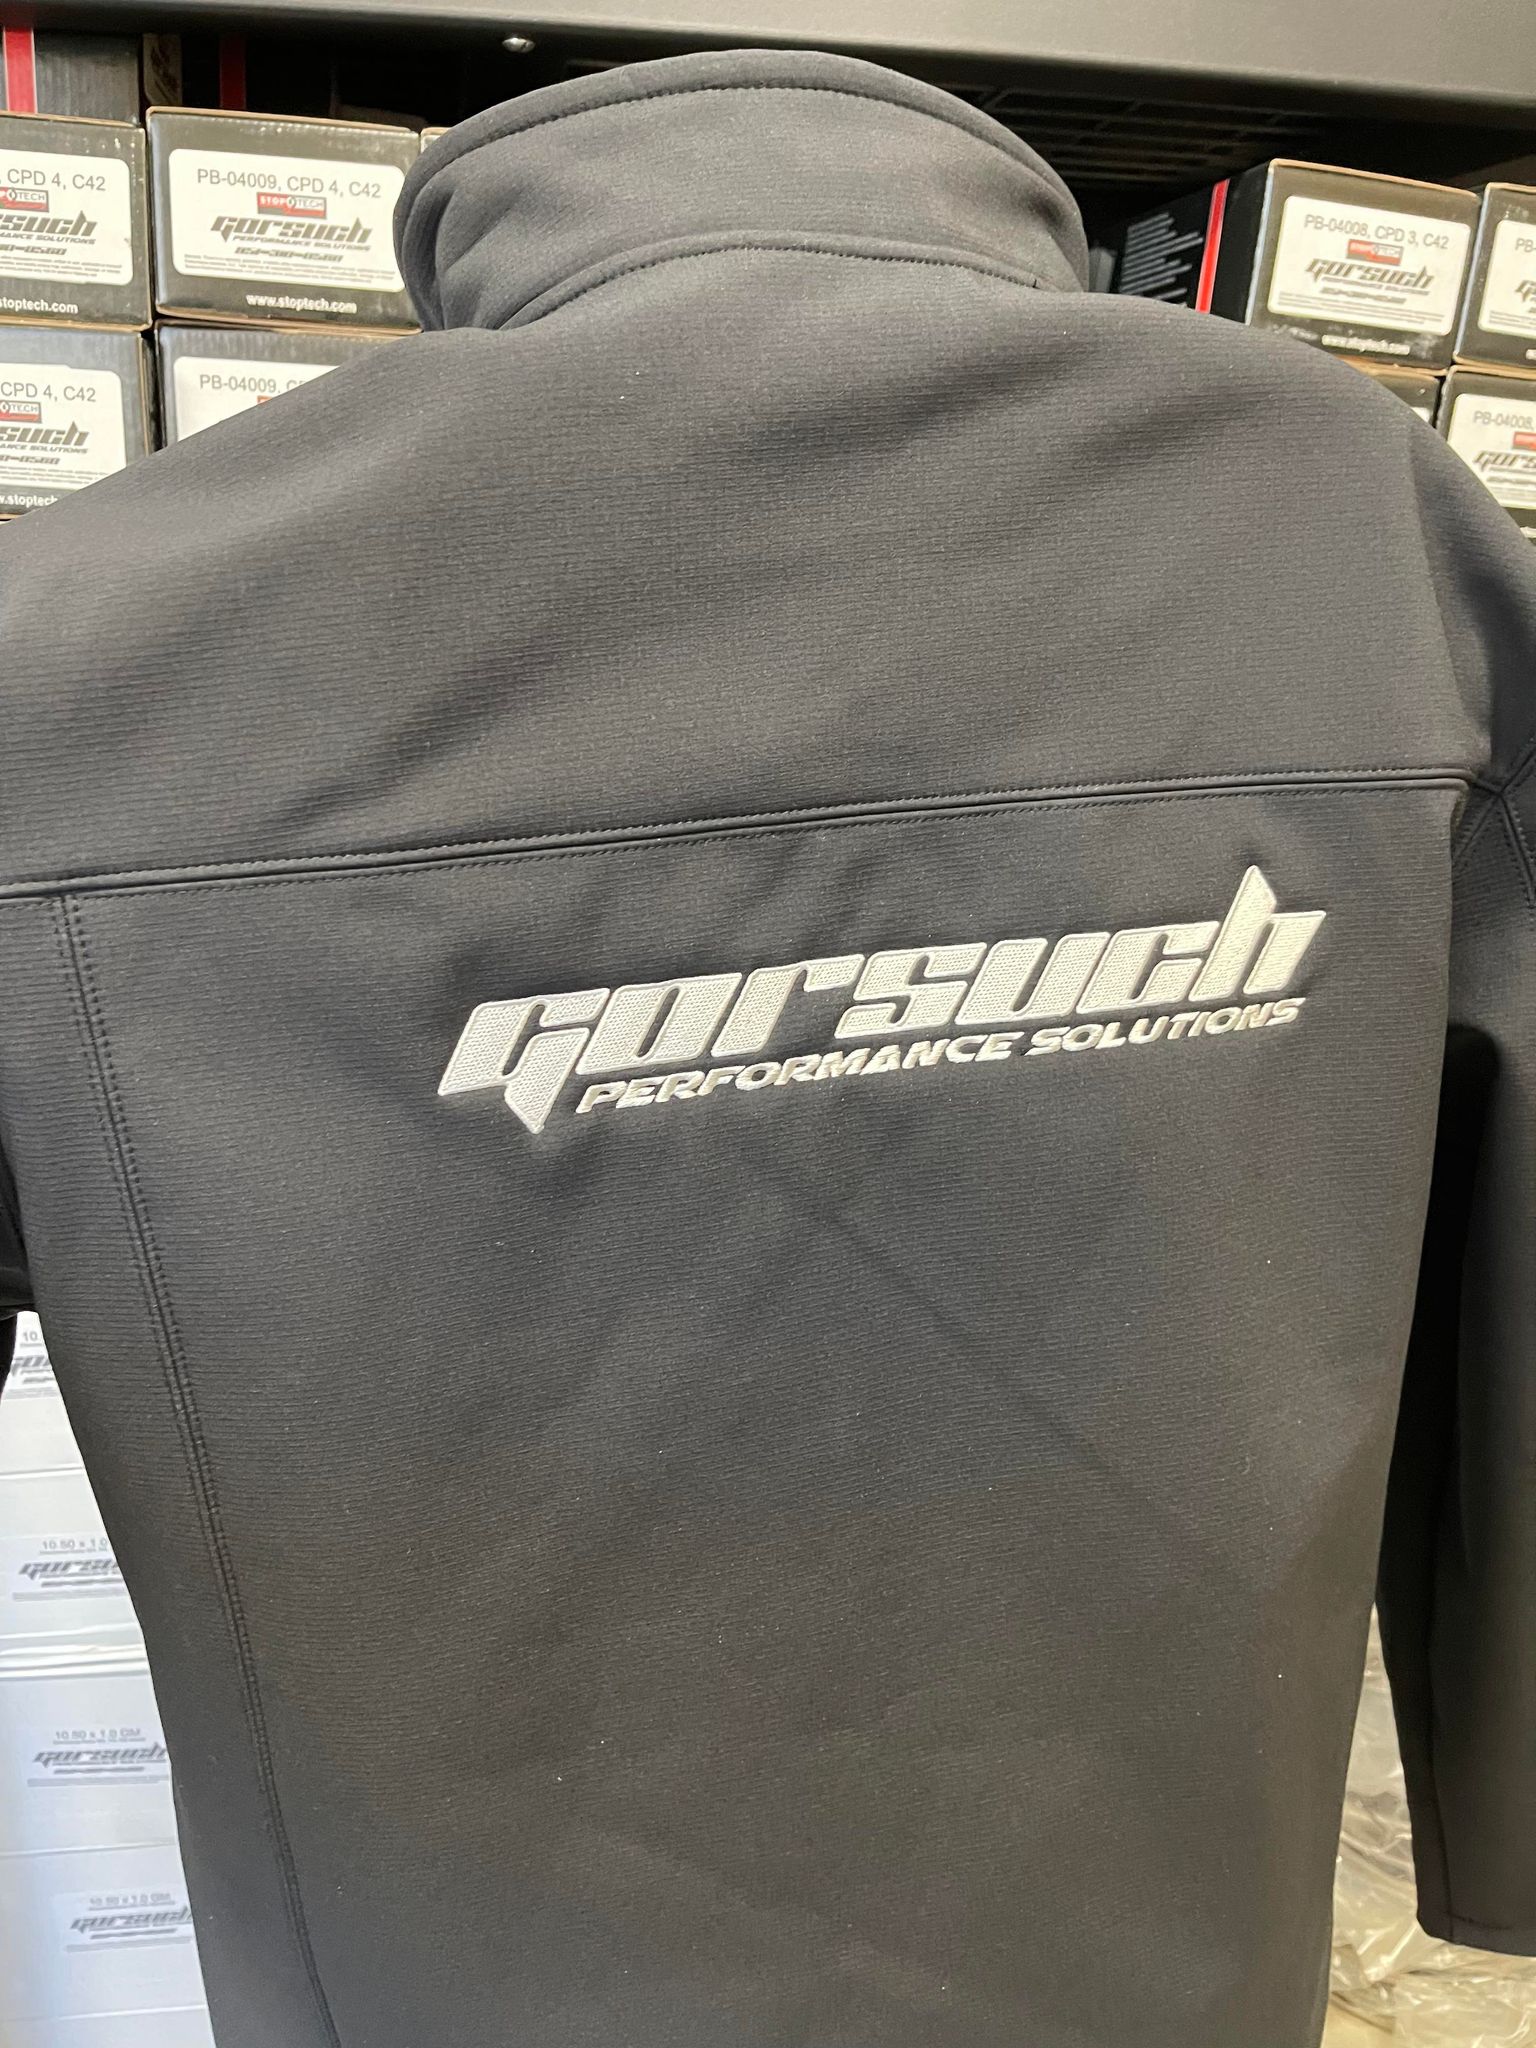 Gorsuch Performance Solutions Jackets